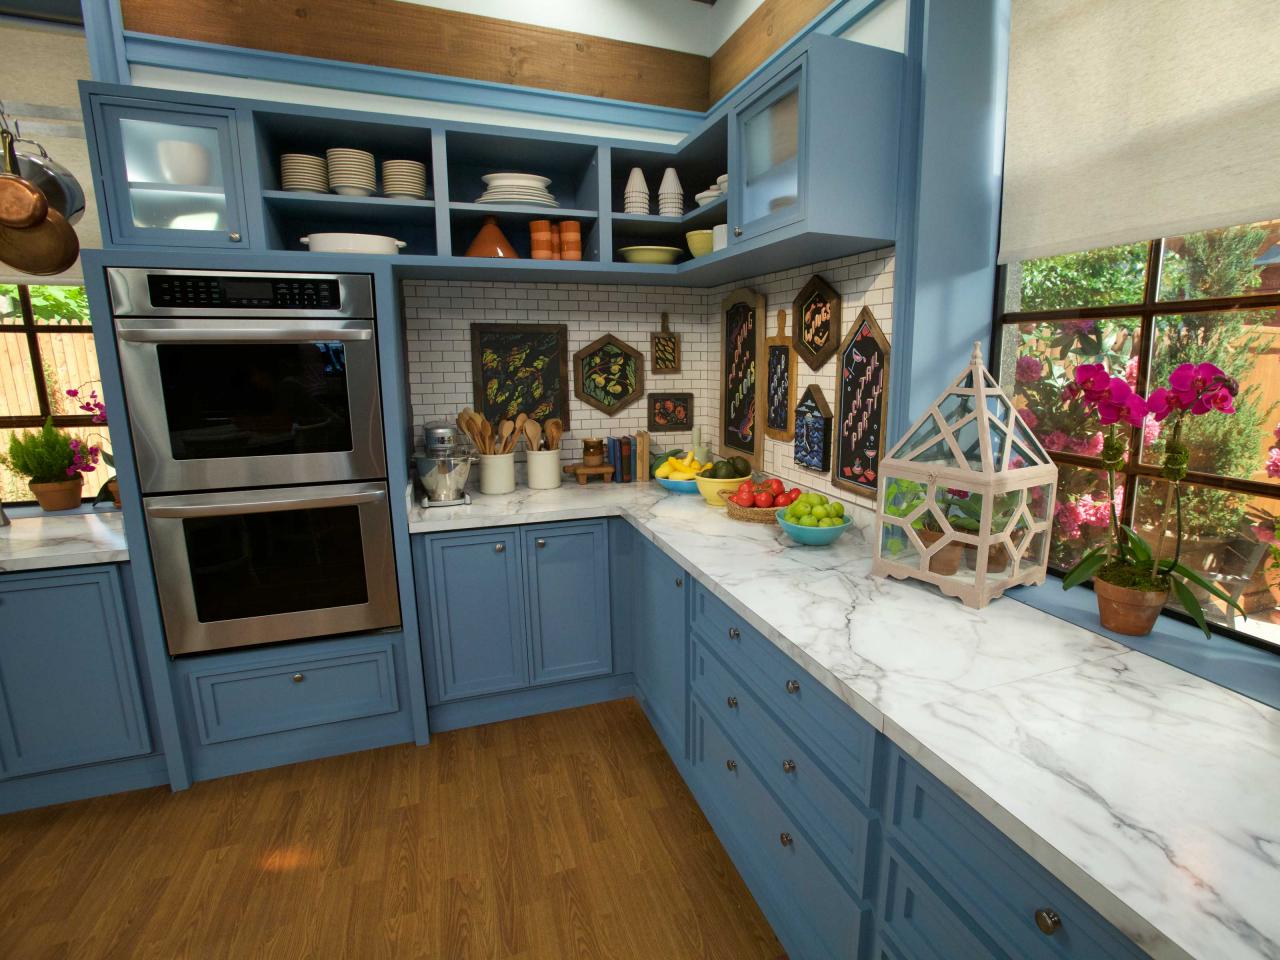 Add Color to Your Kitchen with Tie Dye Towels, FN Dish -  Behind-the-Scenes, Food Trends, and Best Recipes : Food Network